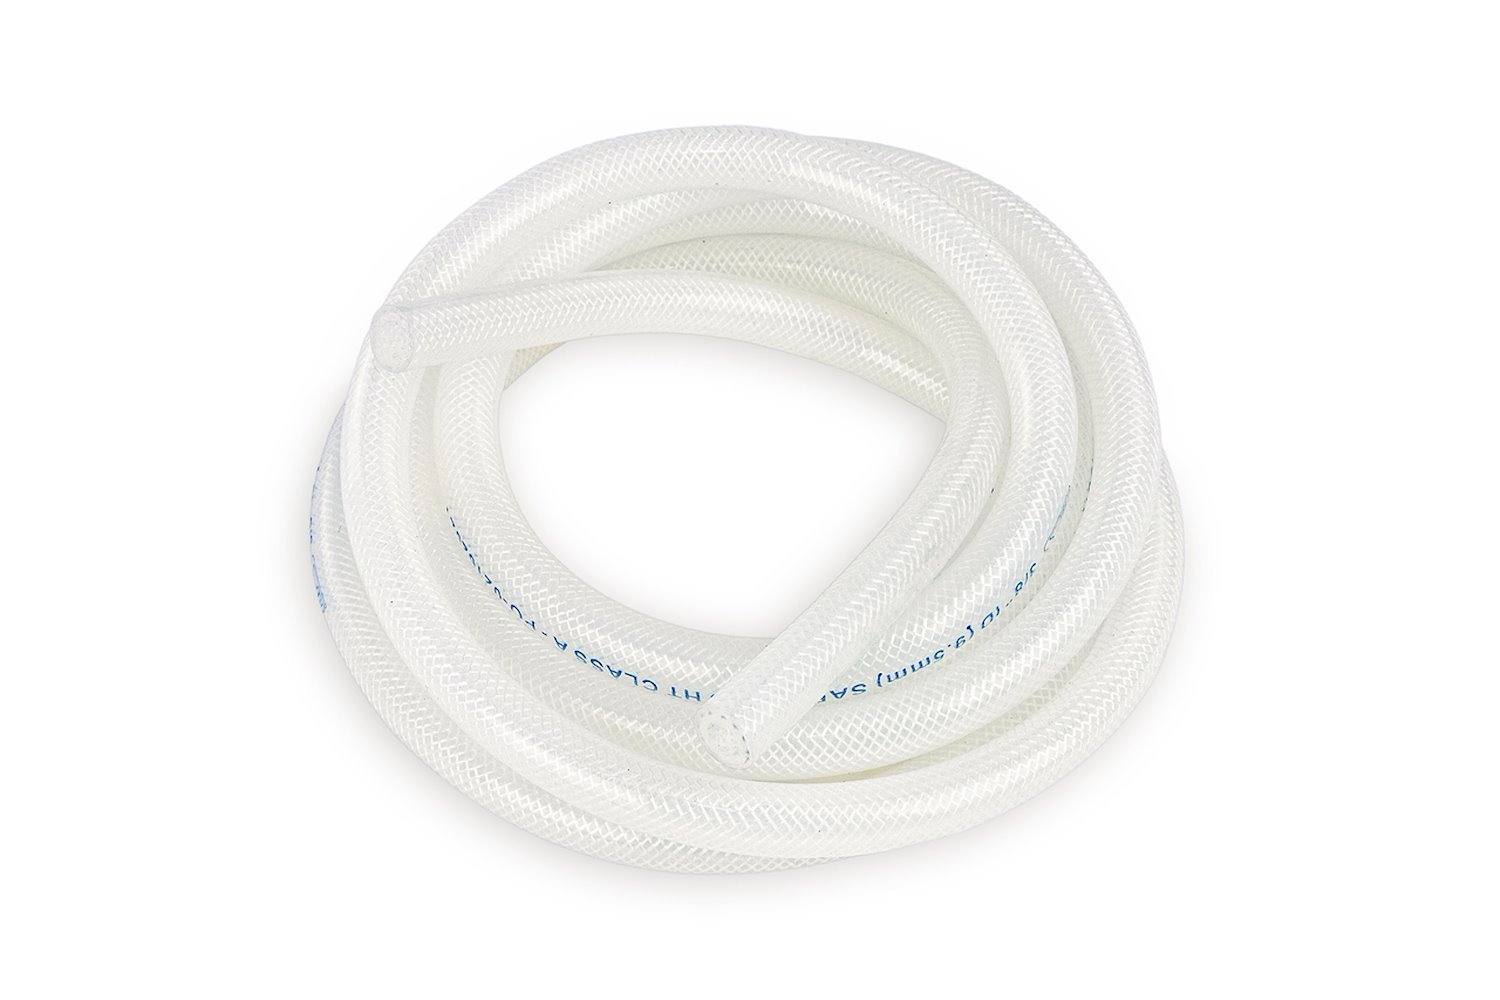 HTHH-075-CLEARx10 Silicone Heater Hose Tubing, High-Temp Reinforced, 3/4 in. ID, 10 ft. Roll, Clear